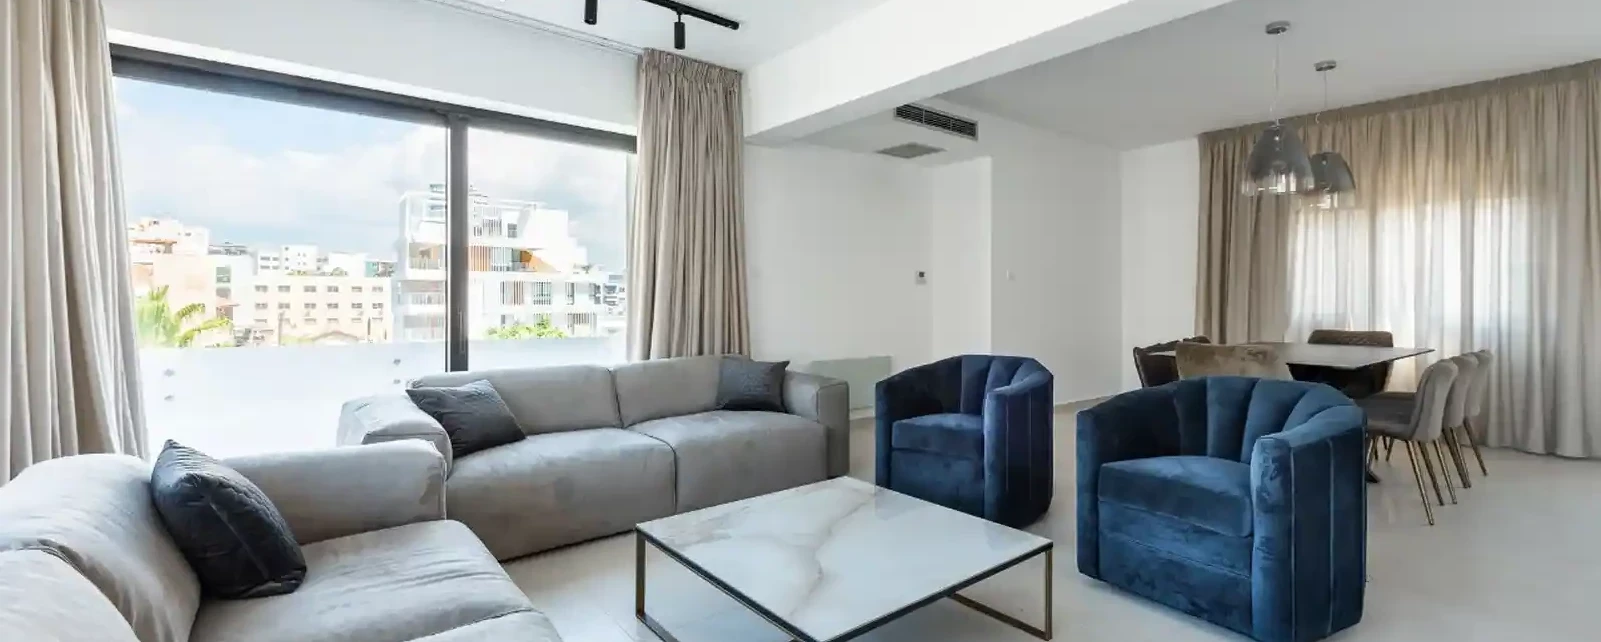 3-bedroom penthouse to rent €4.500, image 1